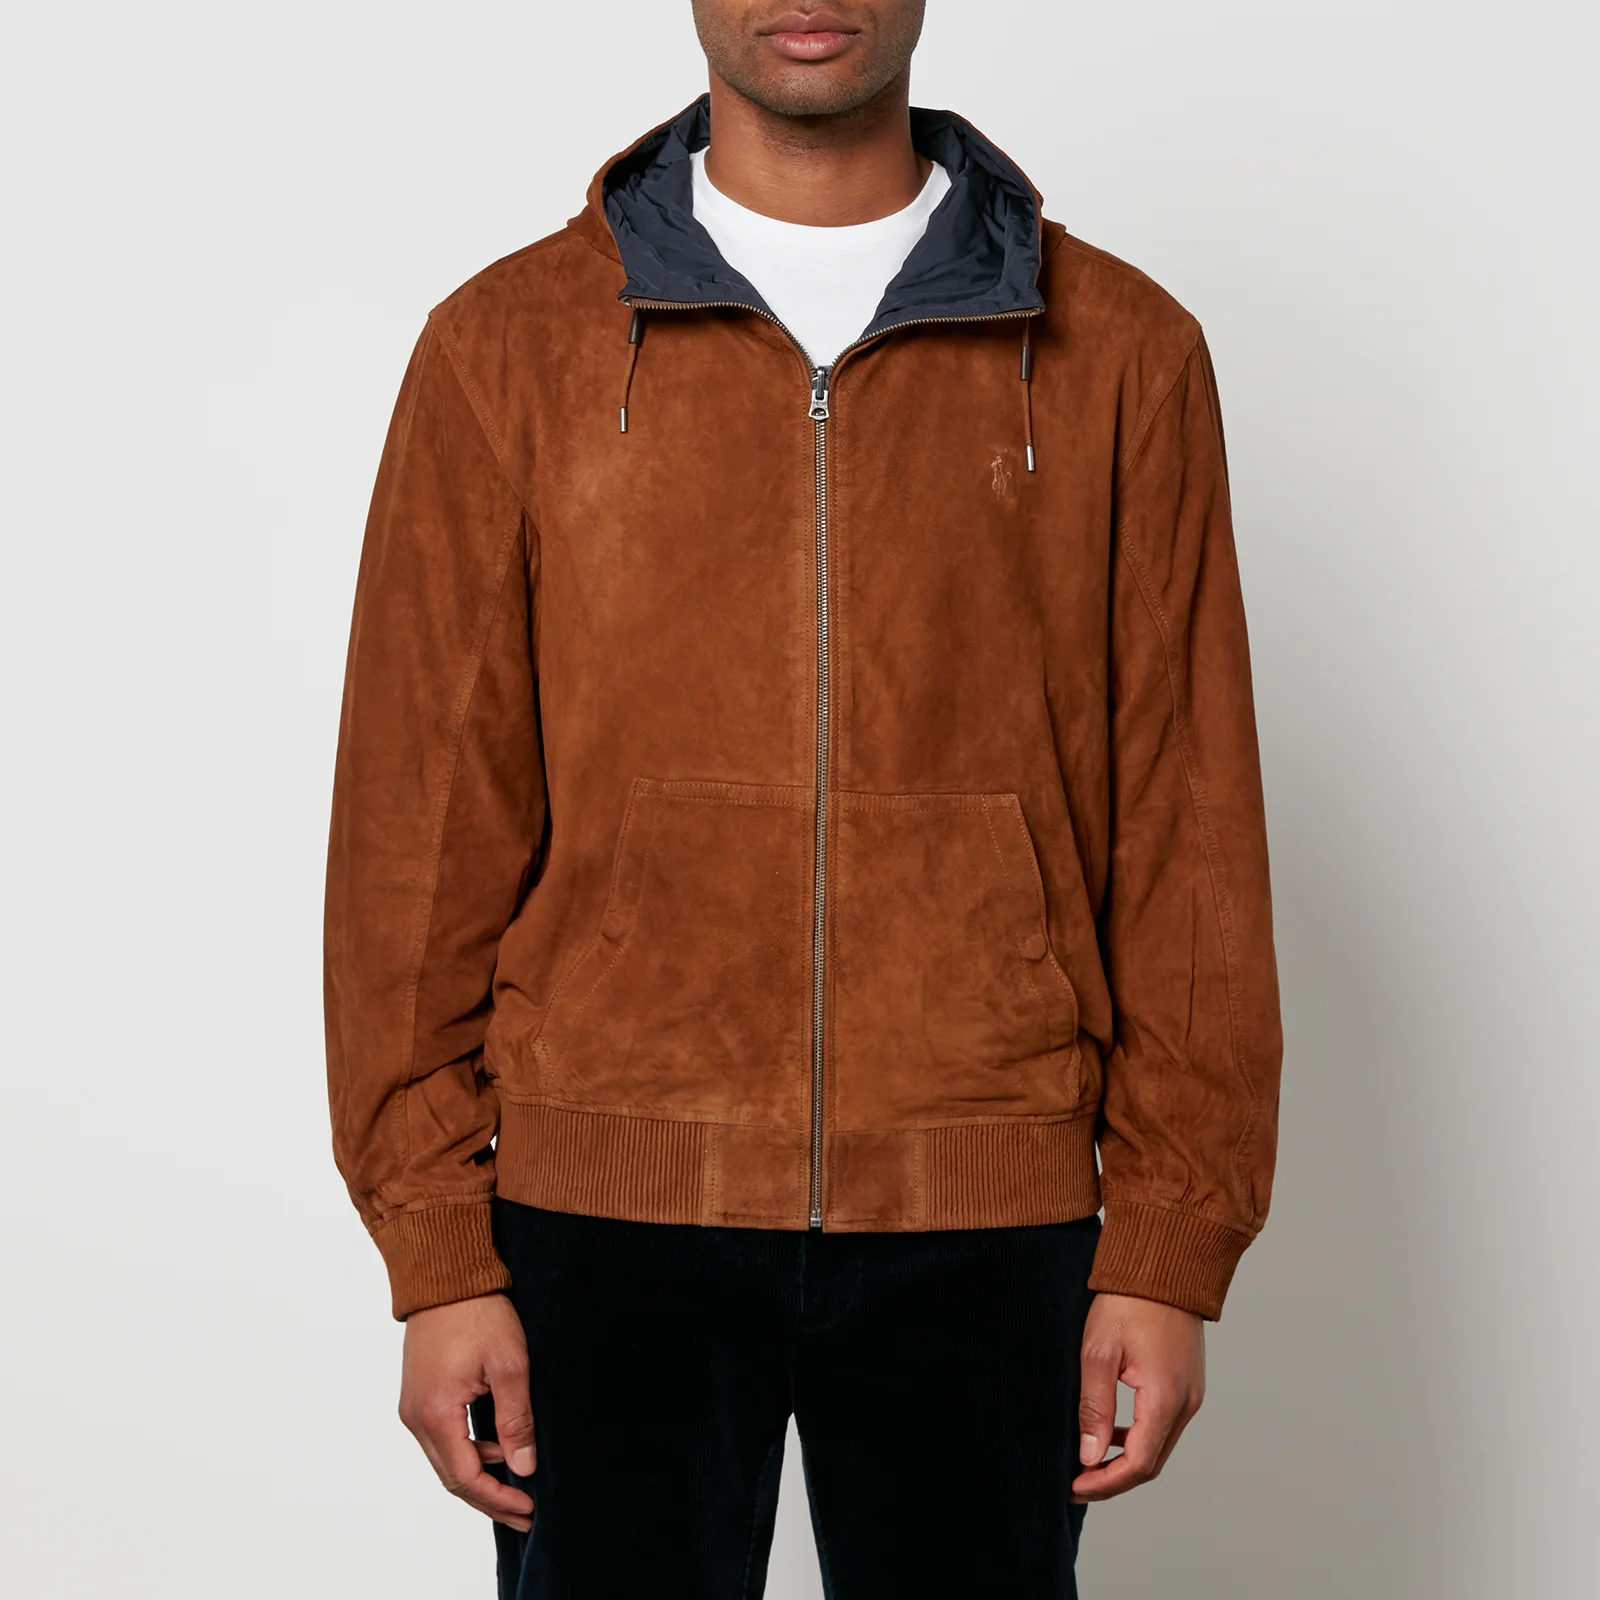 Polo Ralph Lauren Reversible Suede and Taffeta Bomber Jacket - S Image 1